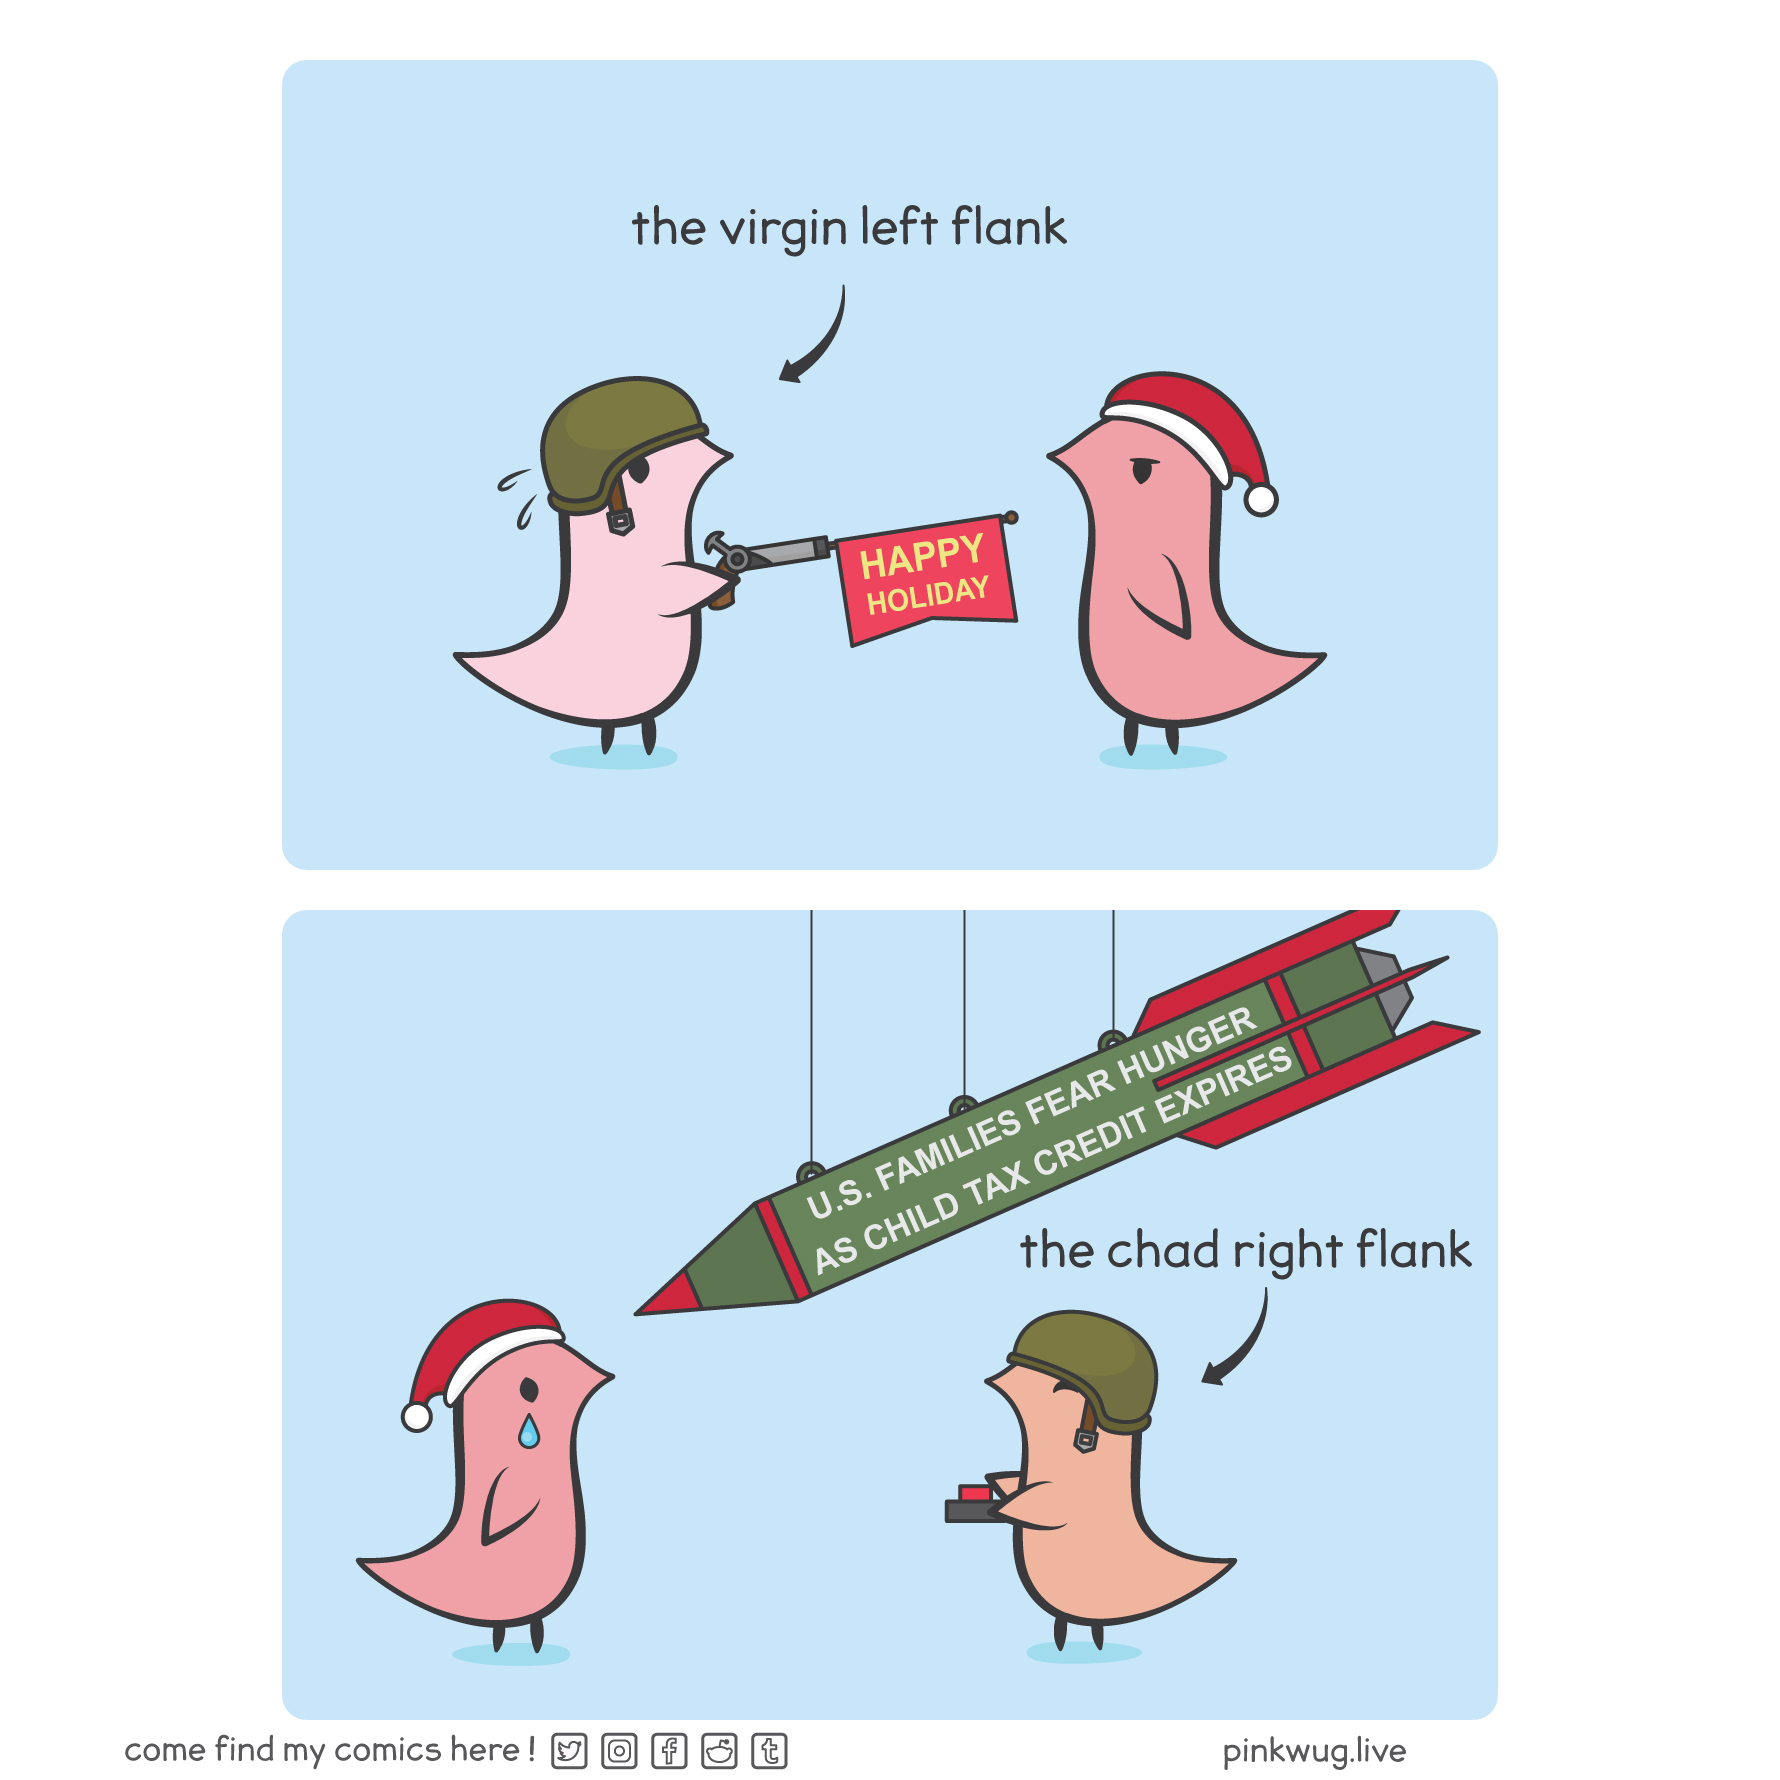 pinkwug comic: Panel 1:
A soldier wug shoots out the message "Happy holiday" towards a red wug with a santa hat.
The red wug looks mildly annoyed.

Panel 2:
A soldier wug presses a button, activating a giant missile pointed towards the red wug with "U.S. families fear hunger as child tax credit expires" on it.
The red wug sheds a single tear.